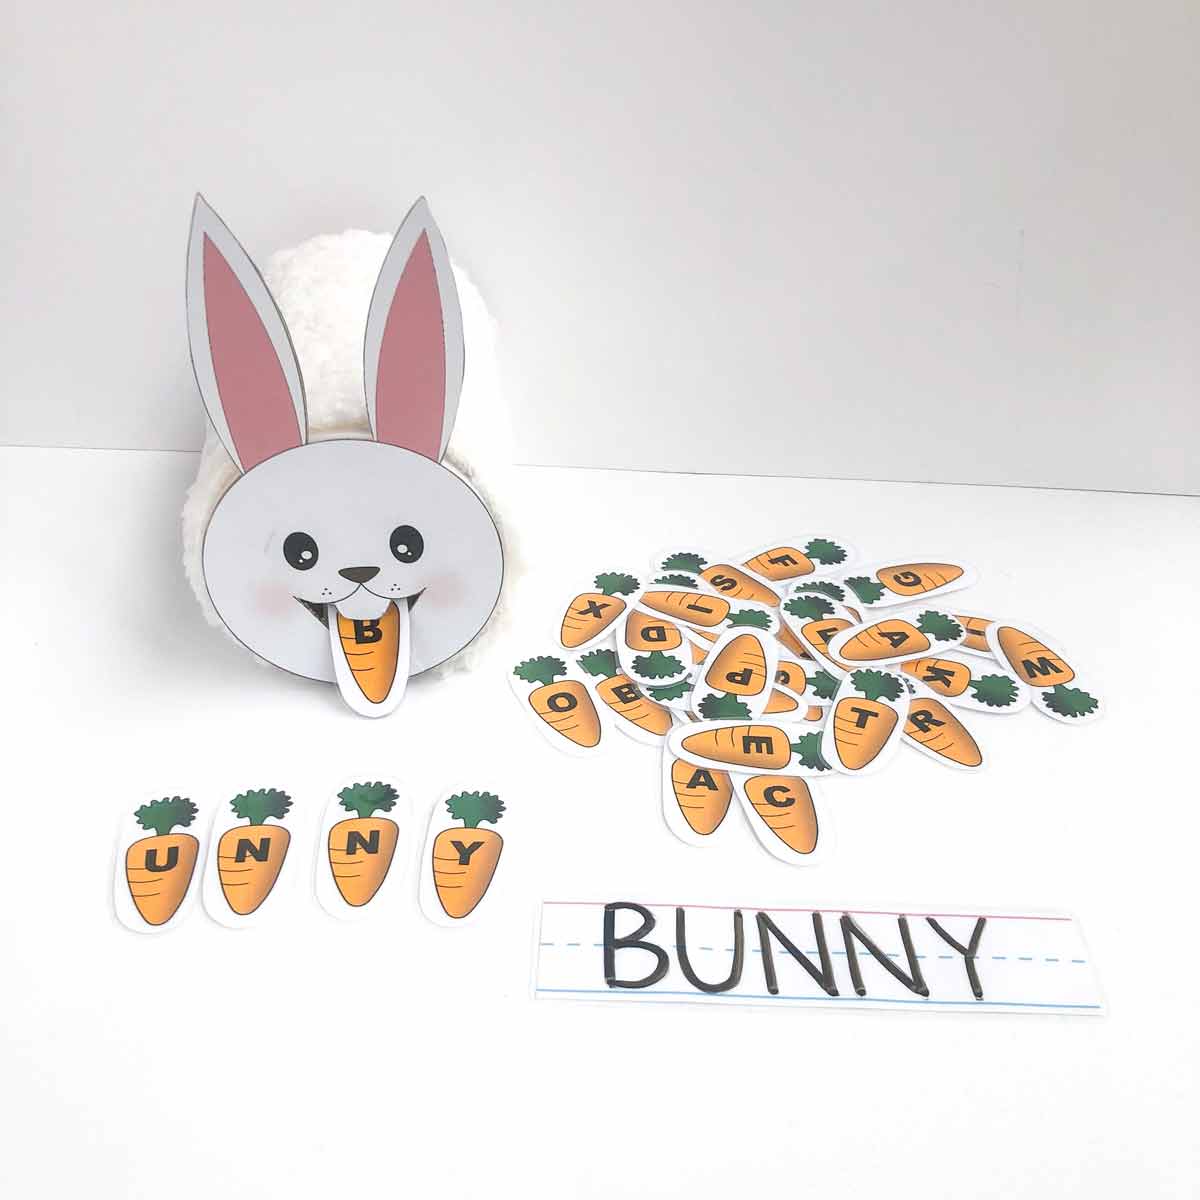 Feed the Bunny Letter Activity